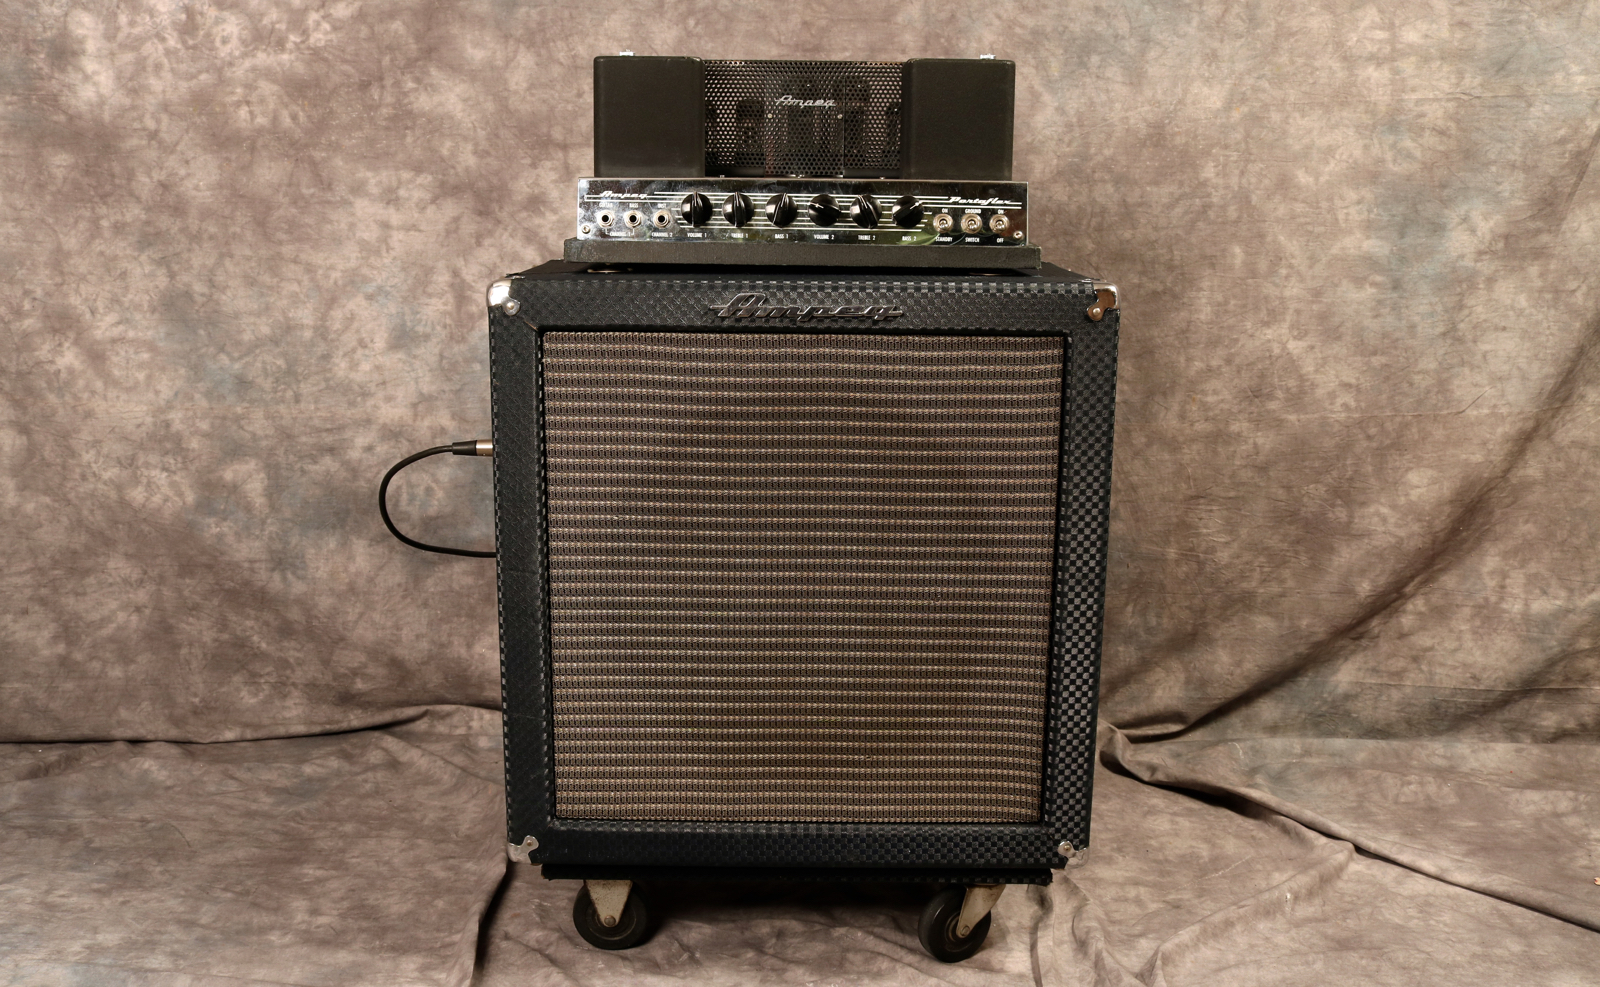 Ampeg B15 Nf 1965 Blue Checked Tolex Amp For Sale Andy Baxter Bass